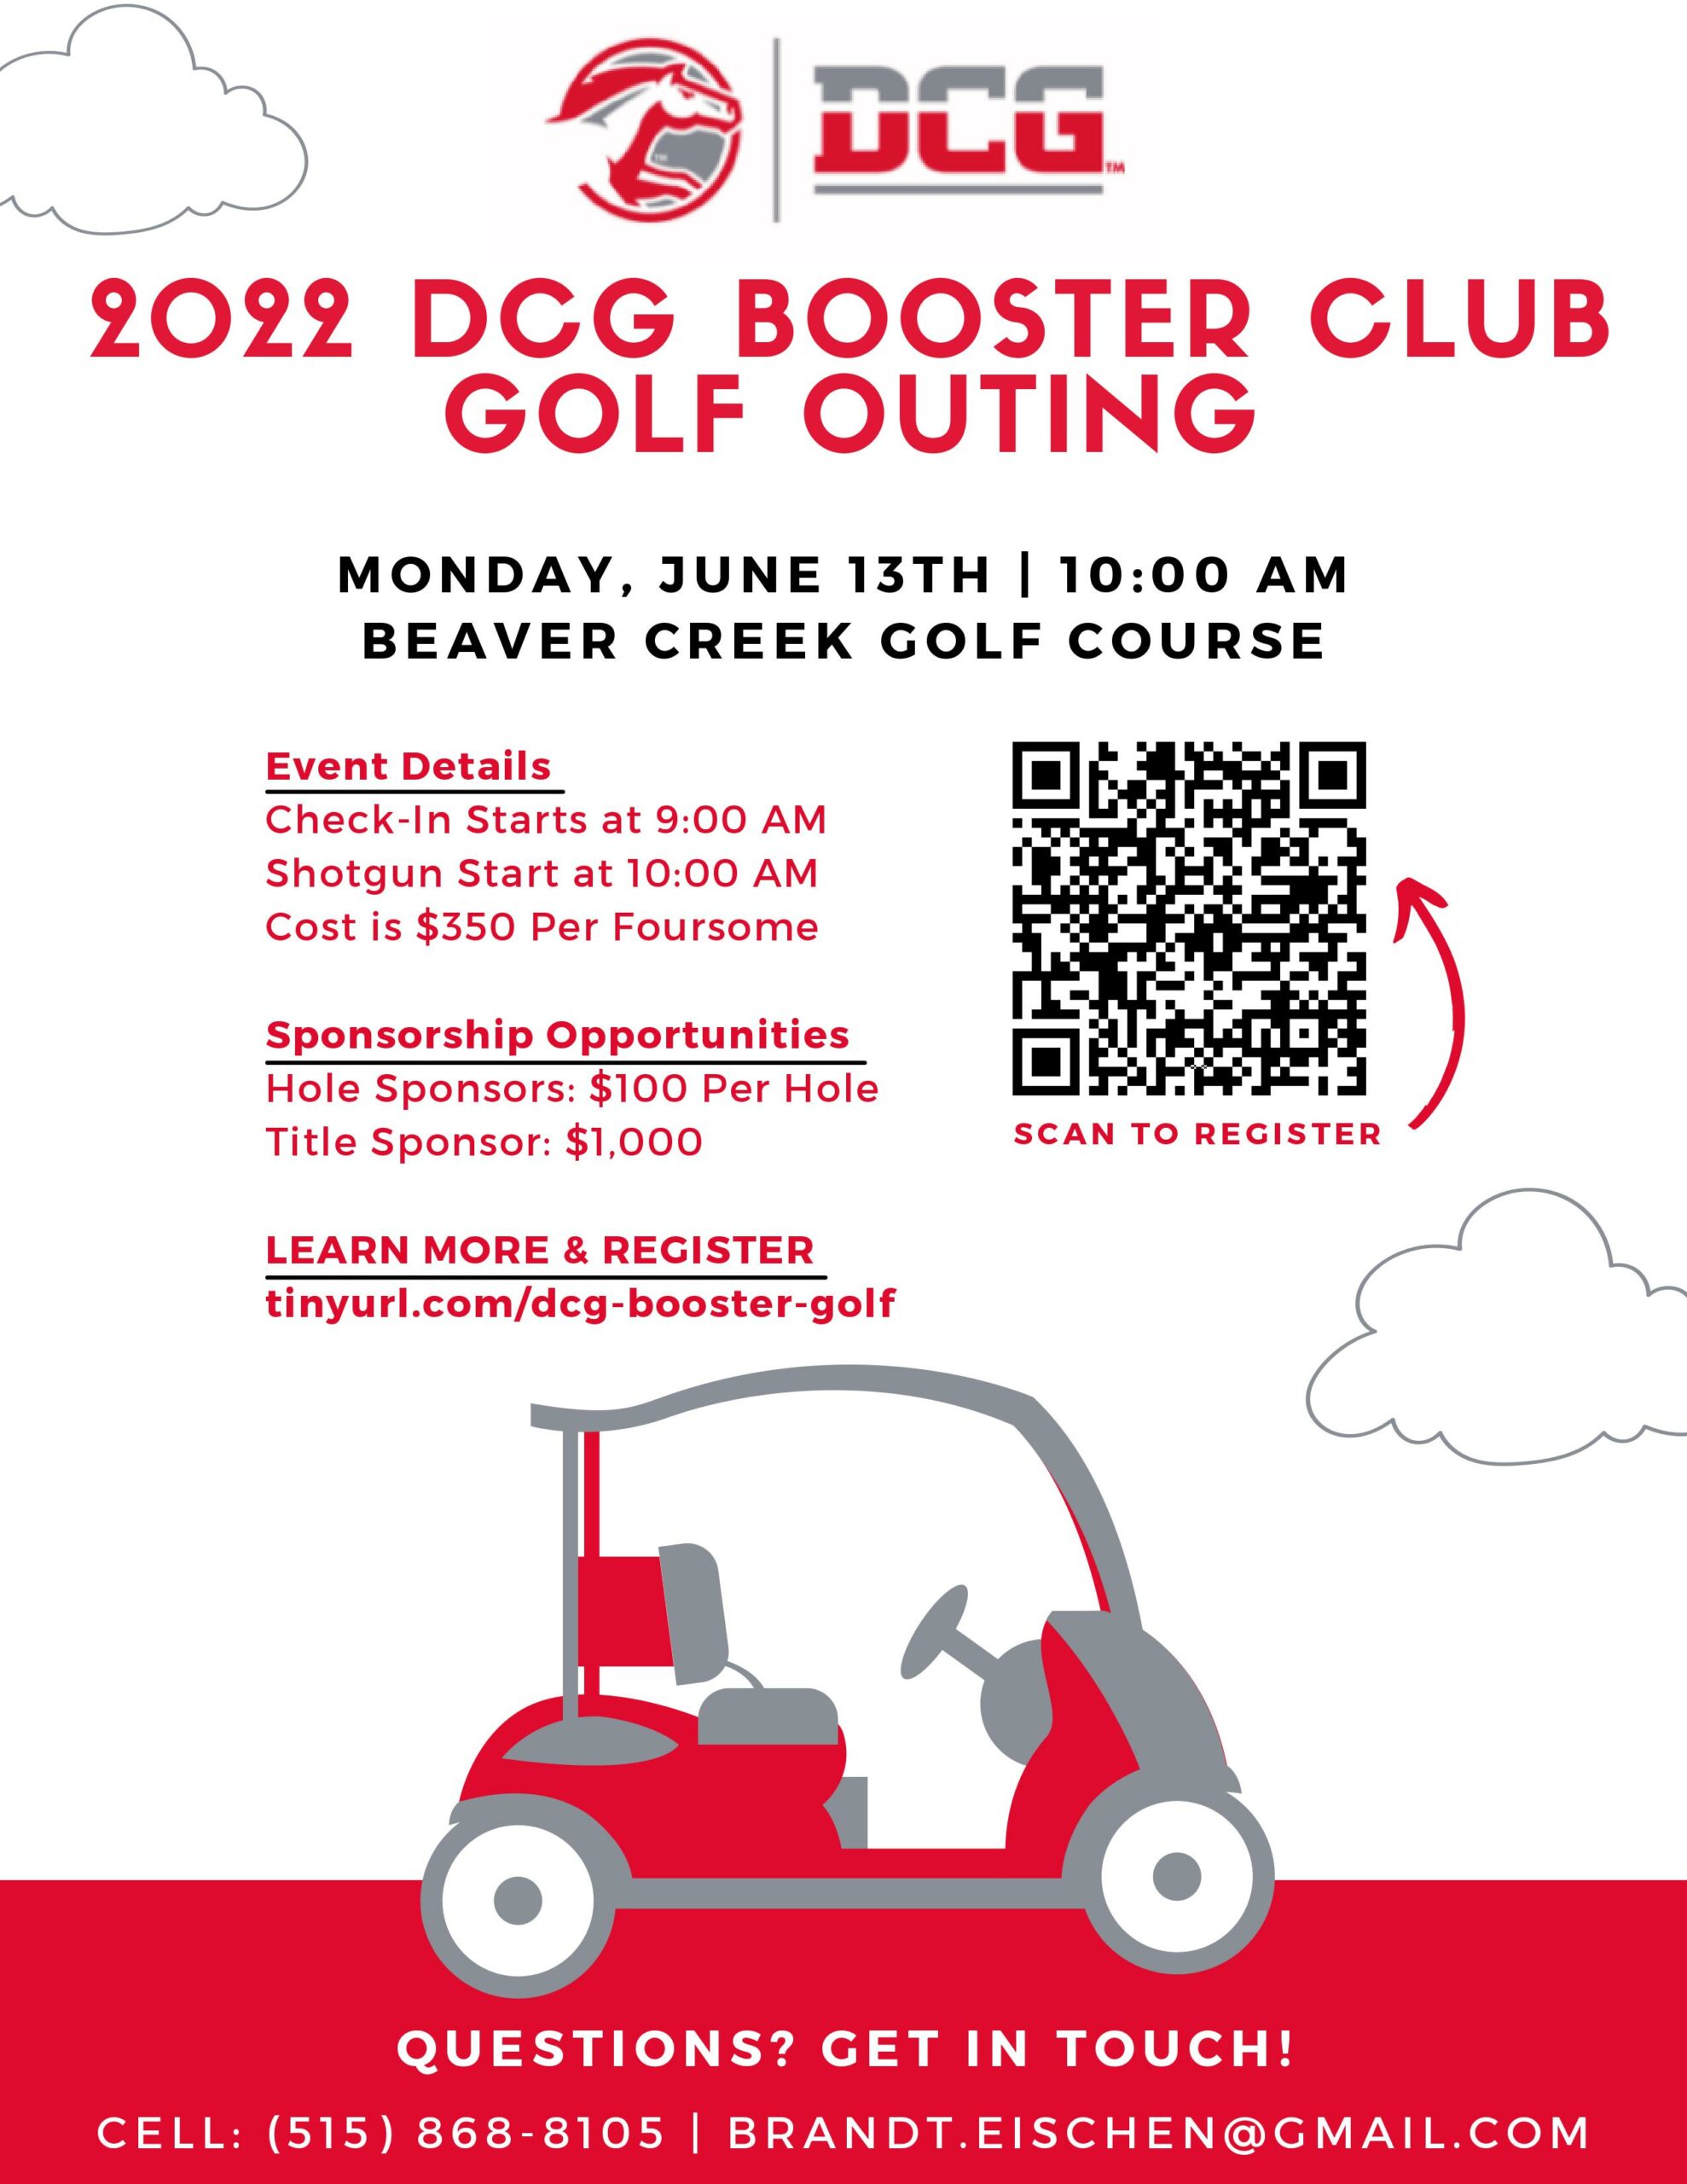 2022 DCG BOOSTER CLUB GOLF OUTING